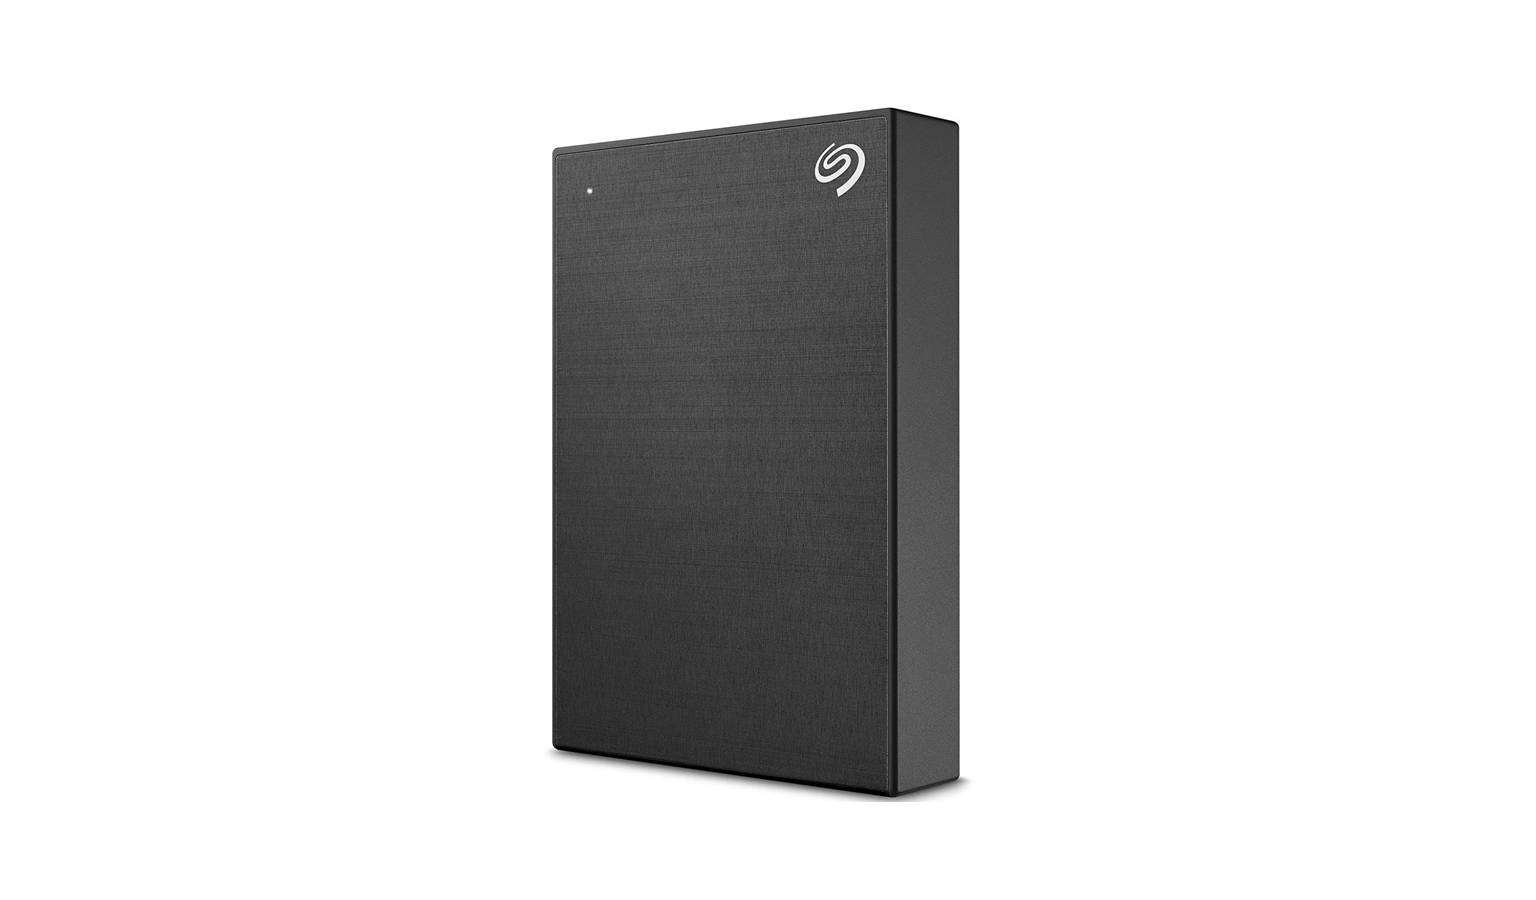 set up seagate backup plus for mac and pc